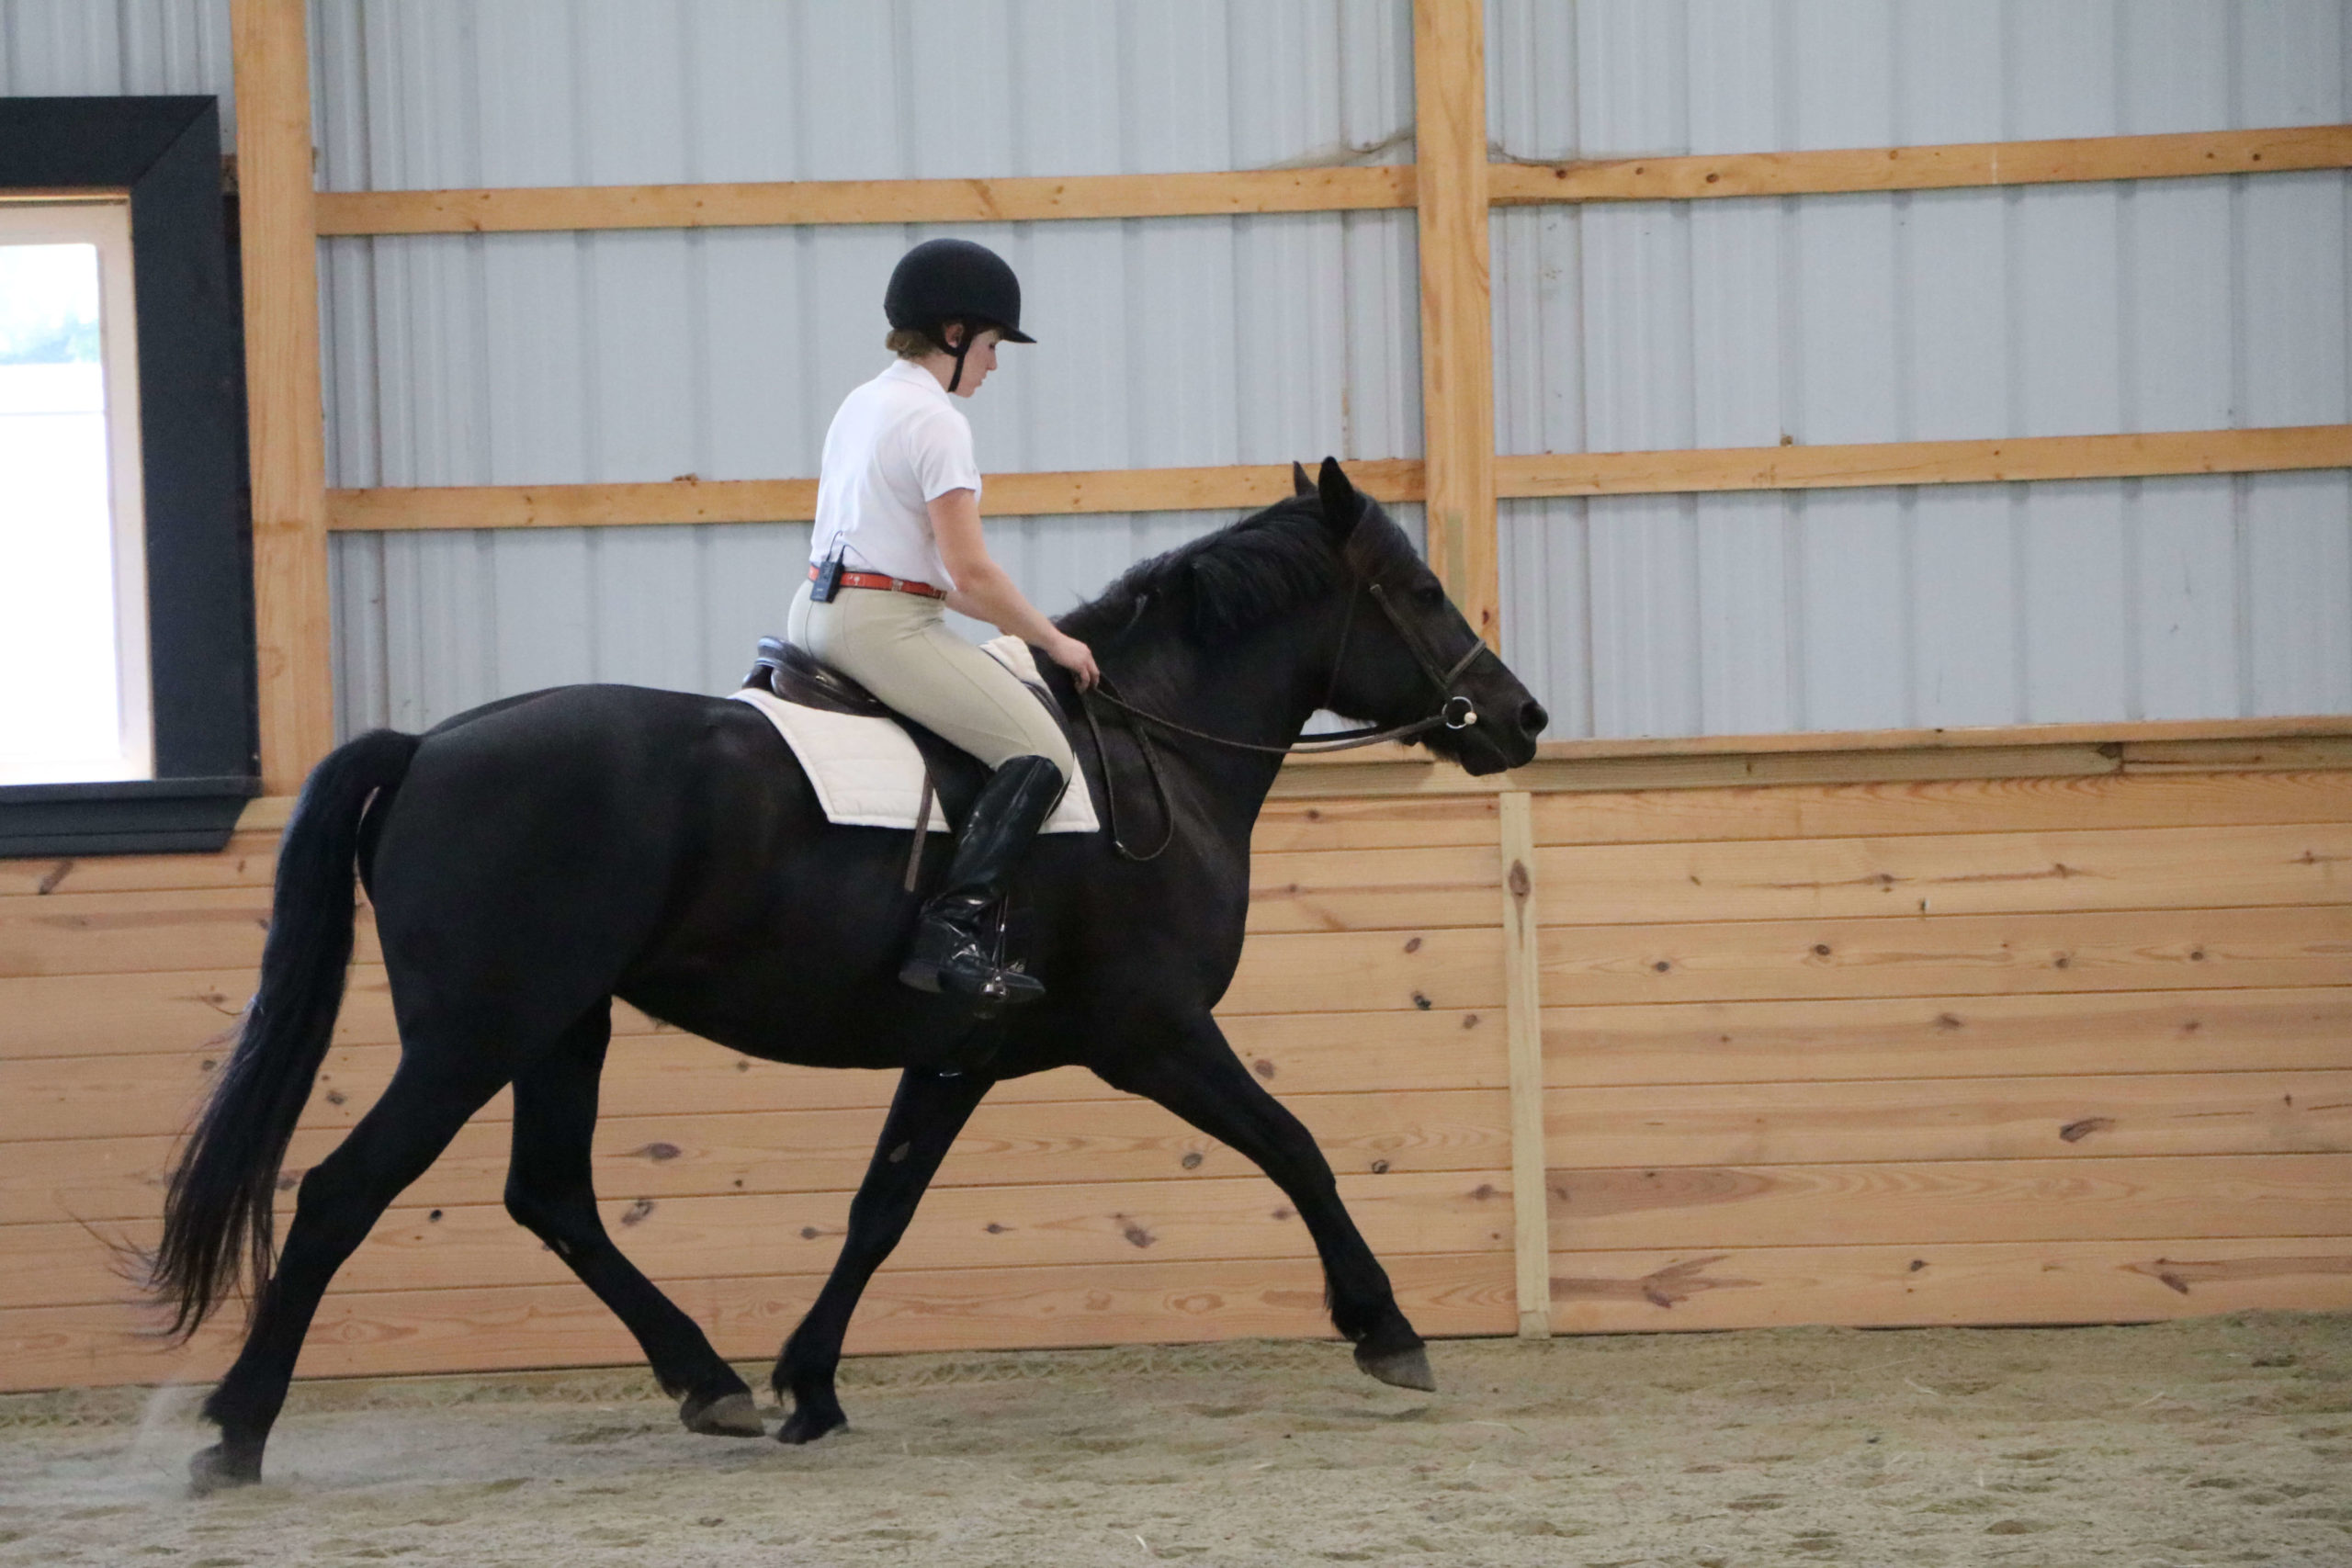 Why Does My Horse Carry His Head So High? - HorseClass